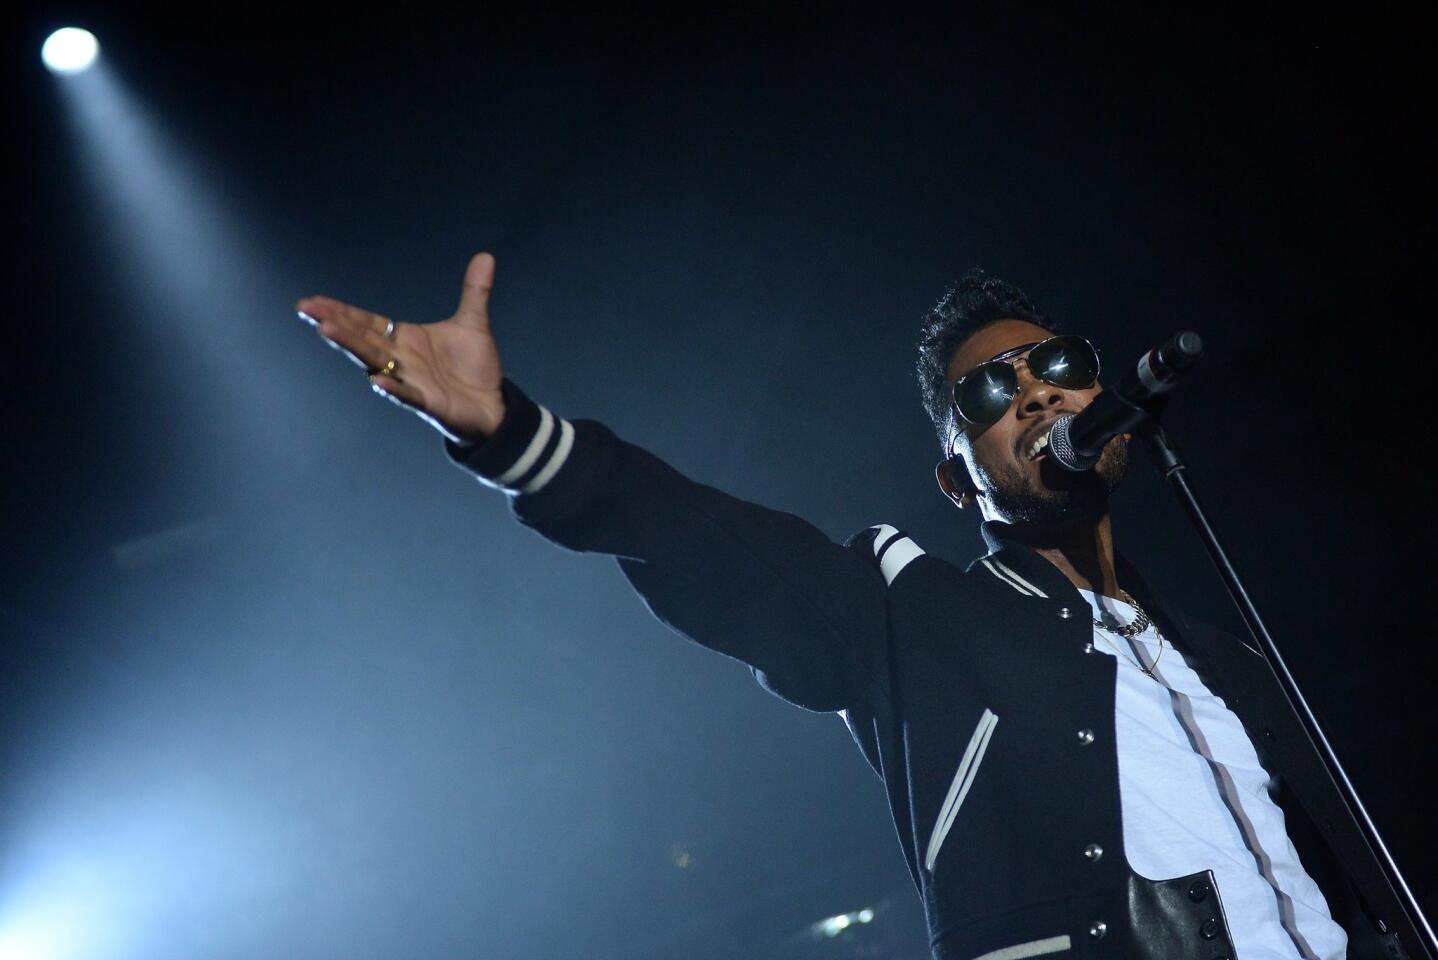 The R&B crooner fell short of suave during his 2013 Billboard Music Awards set, kicking a fan in the head while attempting a leap over the audience onto a different part of the stage. The failed stunt landed him in legal action limbo after news broke that the injured girl might have suffered brain damage. We suggest that Miguel let his vocal cords do the acrobatics.